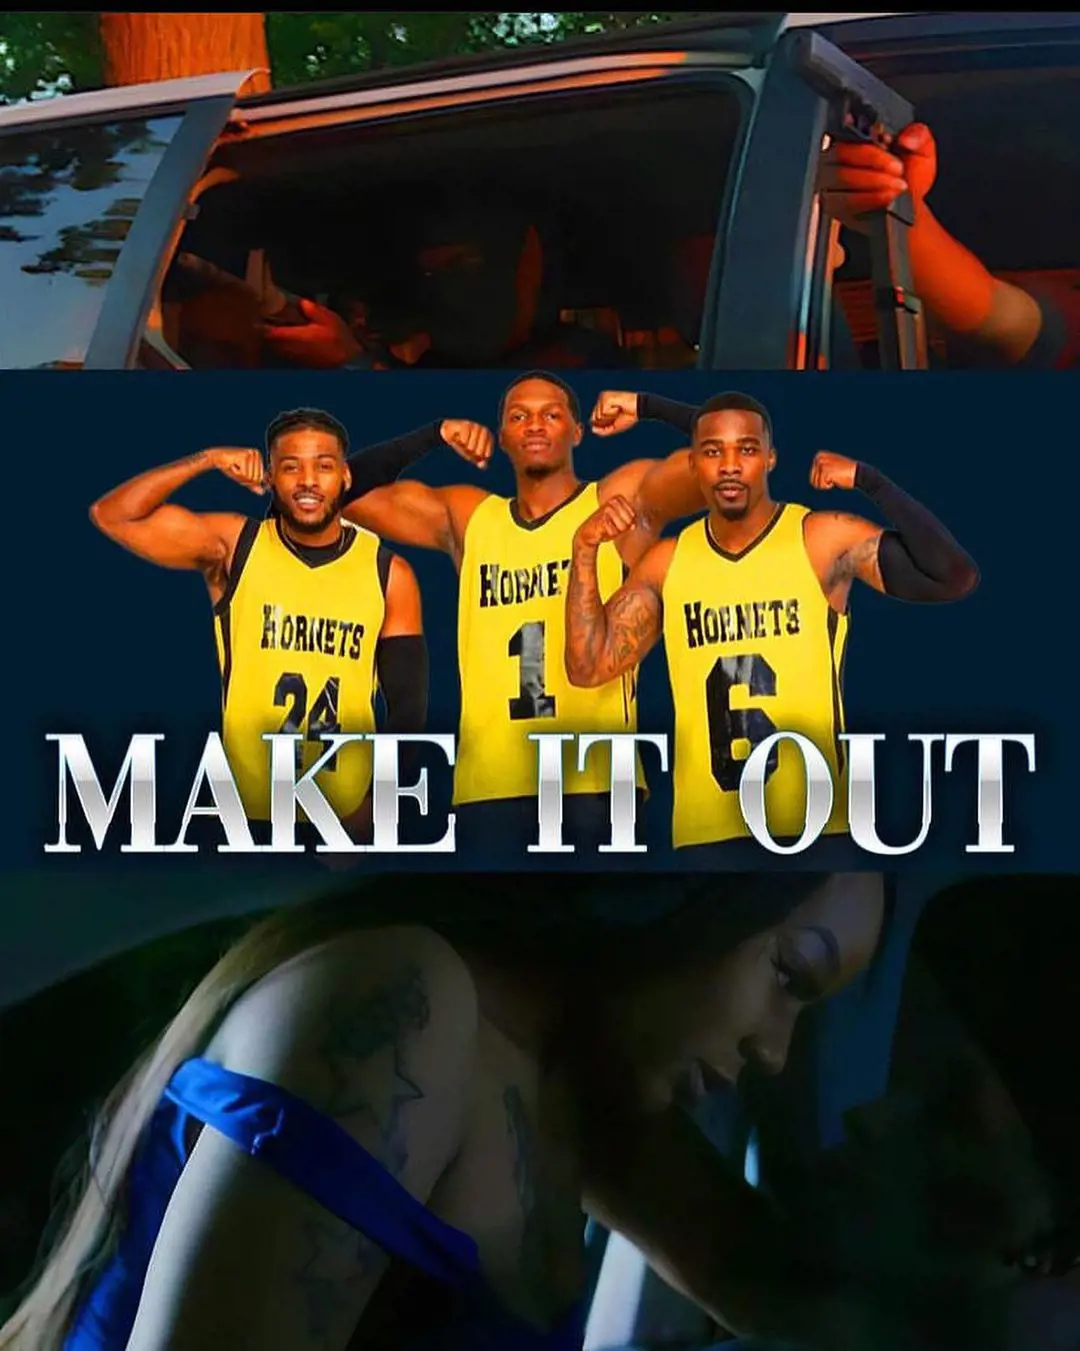 Make It Out Tubi Tv movie is a sports drama filled with thriller